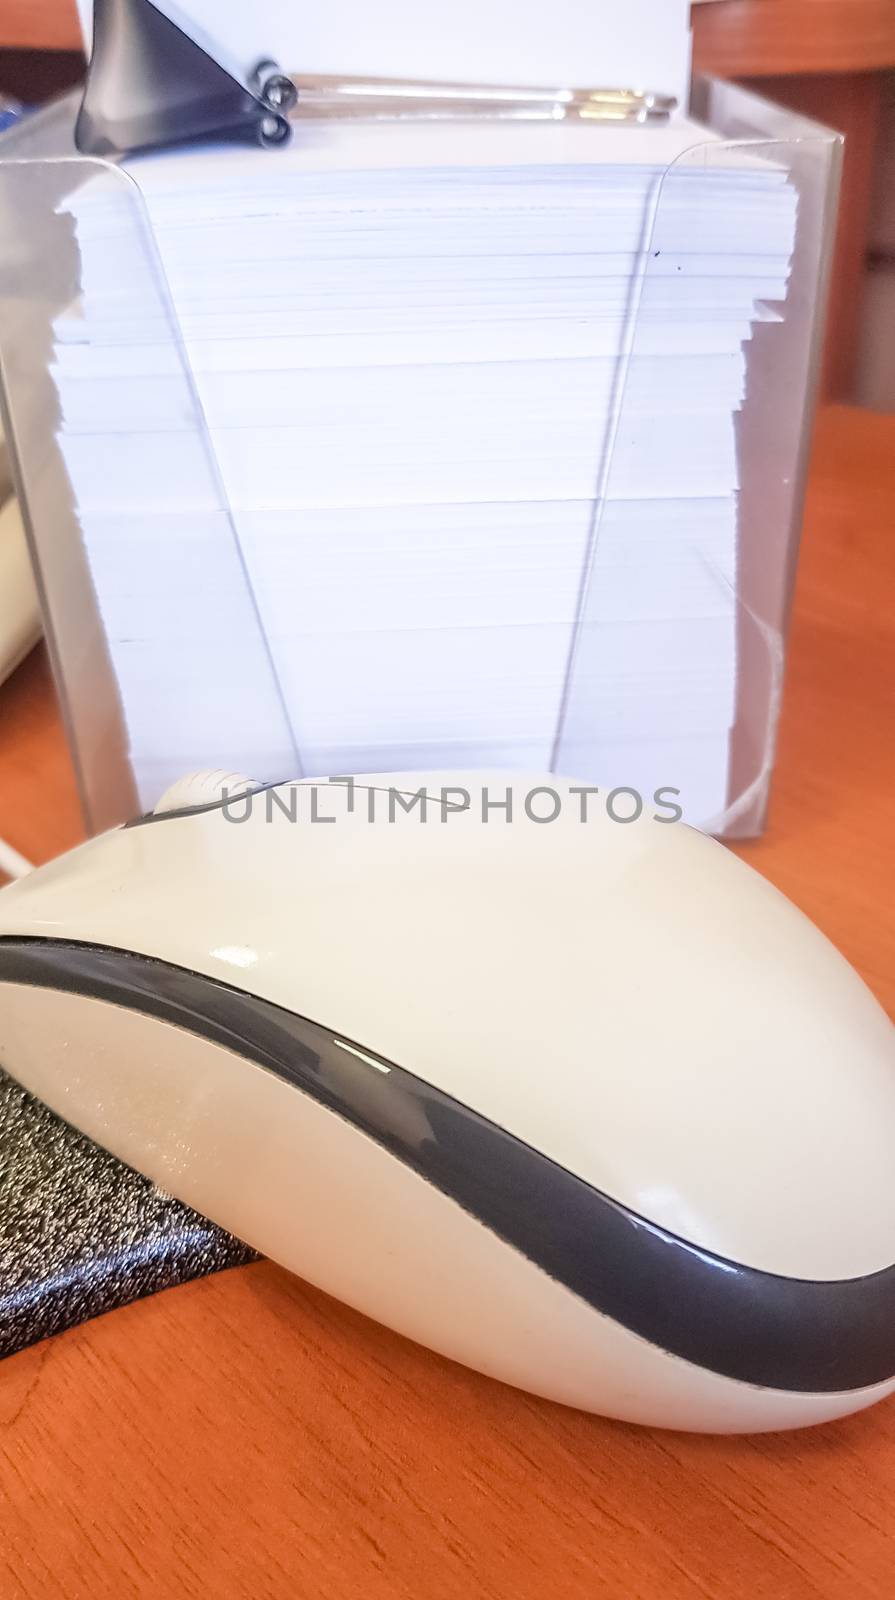 Computer mouse and a stack of notes in a plastic box close-up, vertical photo.